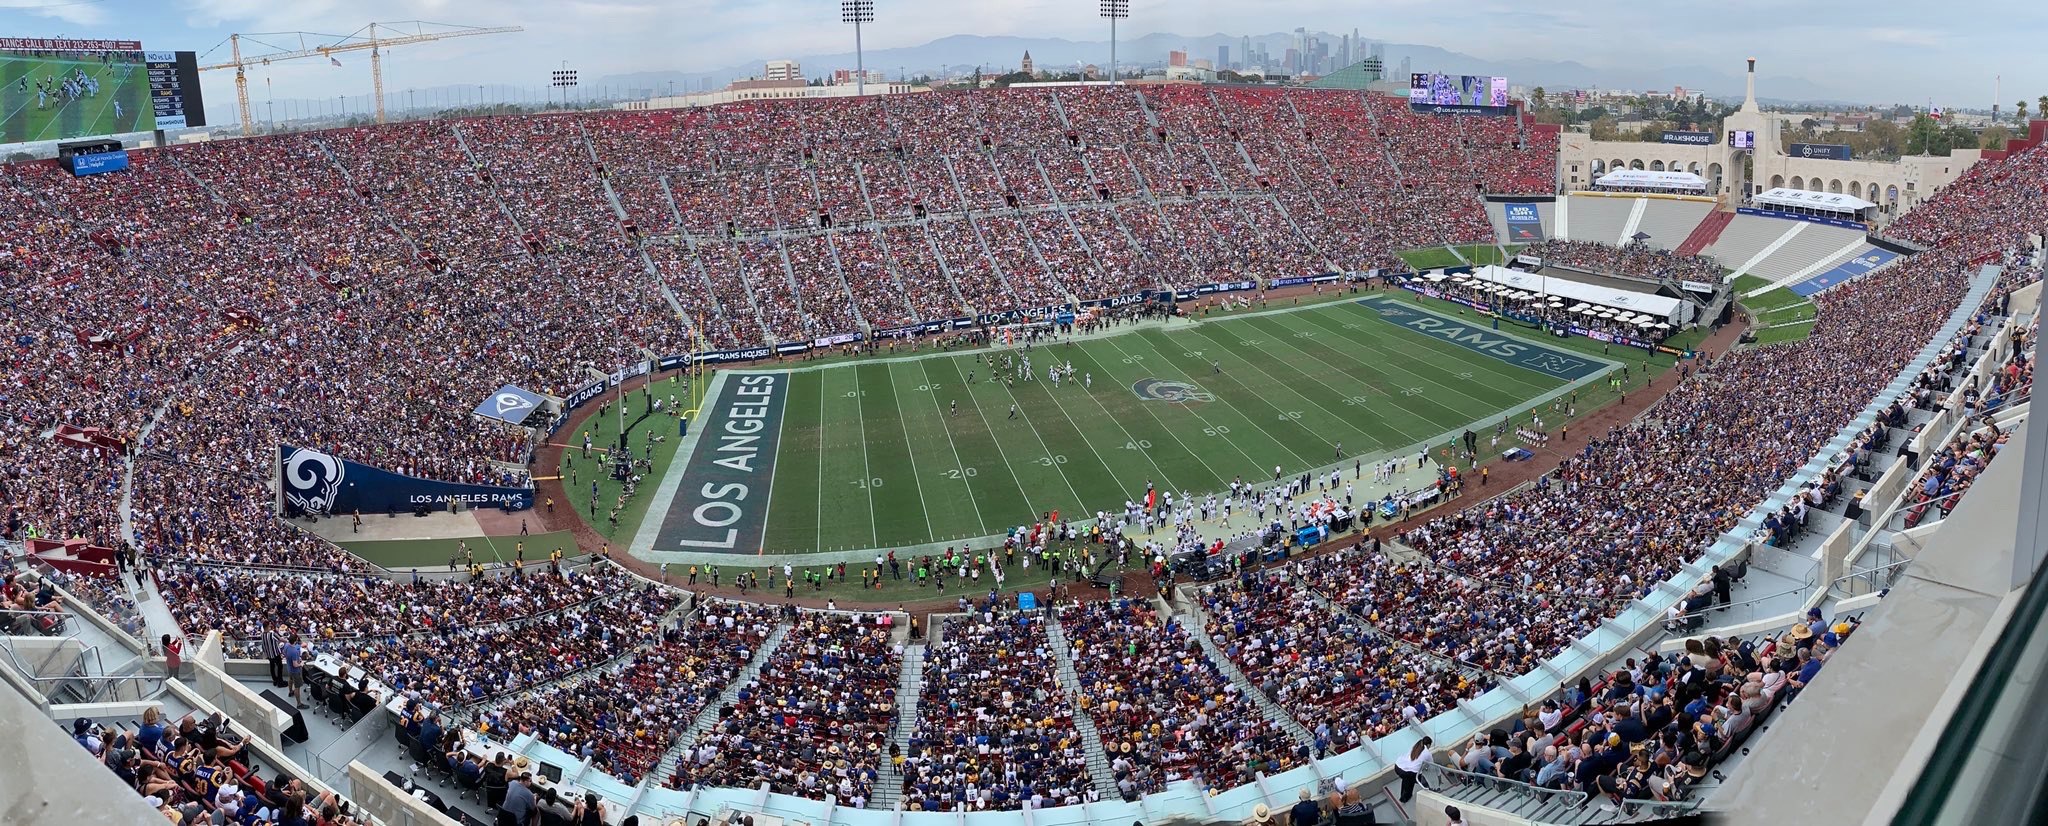 Los Angeles Rams at the Los Angeles Coliseum